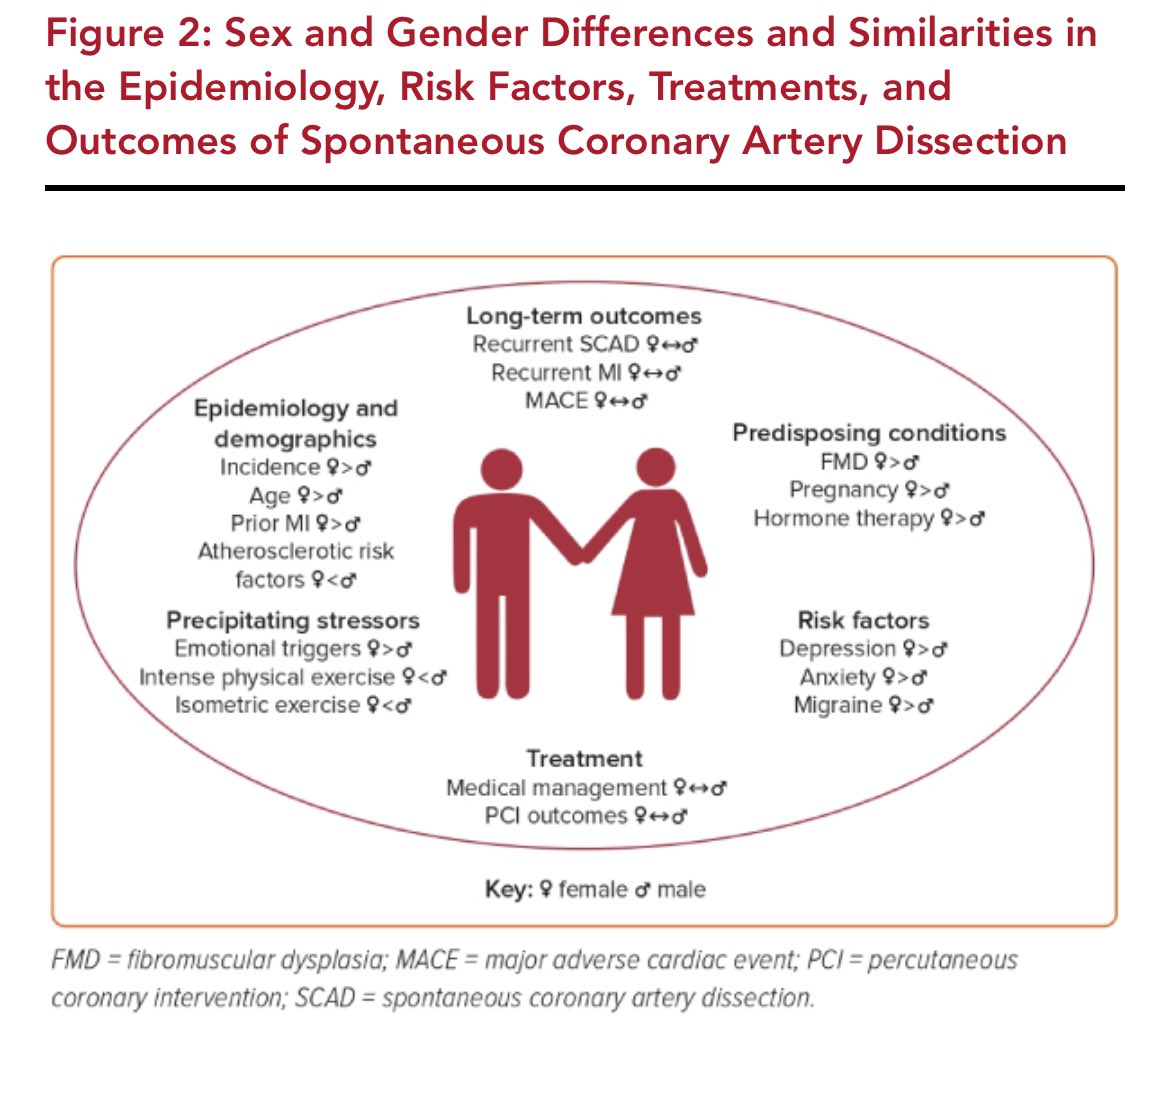 🗣️EXTRA! EXTRA🗣️ New review of sex and gender differences in spontaneous coronary artery dissection published in #USCJournal with @wellsbryanj and Anna Goebel of @PennIMResidents @radcliffeCARDIO @EmoryCCRI @emory_heart uscjournal.com/articles/sex-a…